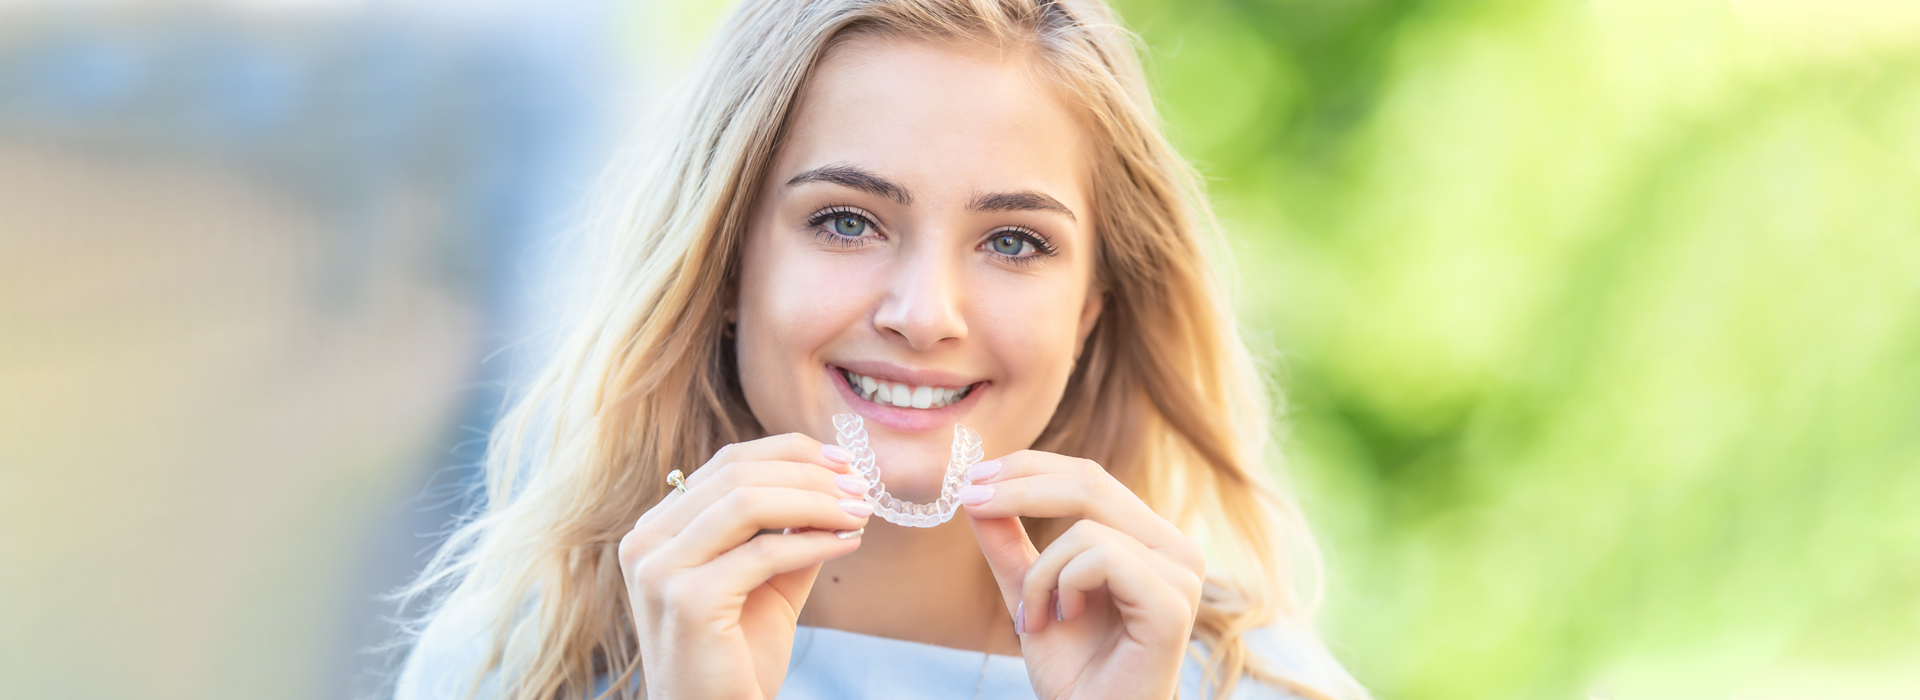 Are Invisible Braces Right for You?